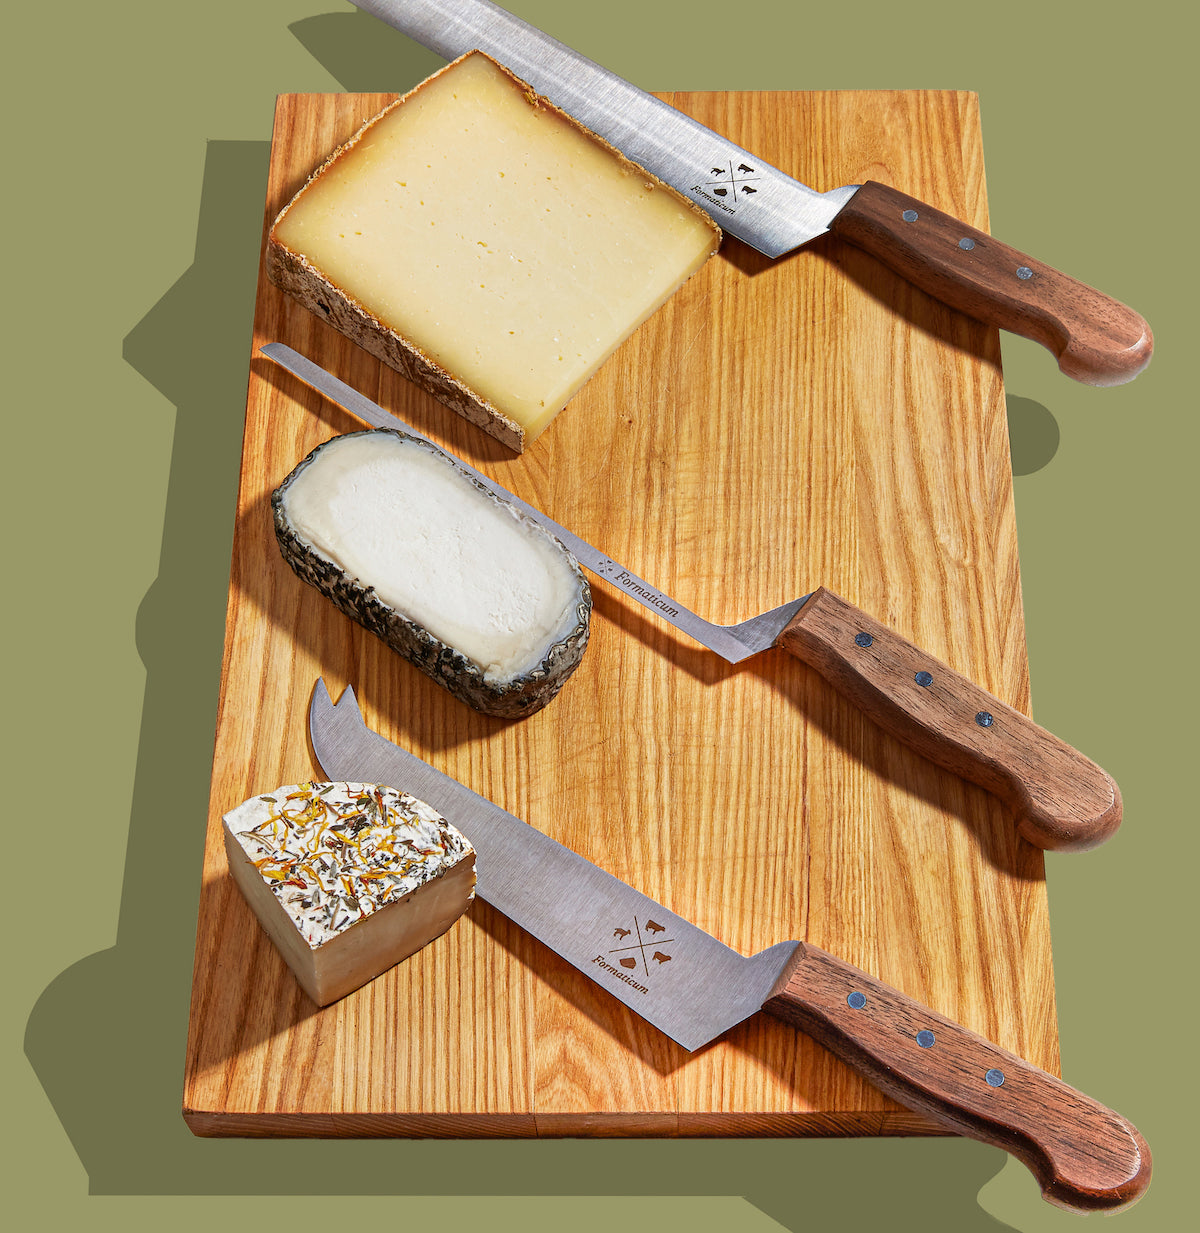 Cheese Knife 101: A Guide to Cheese Knives